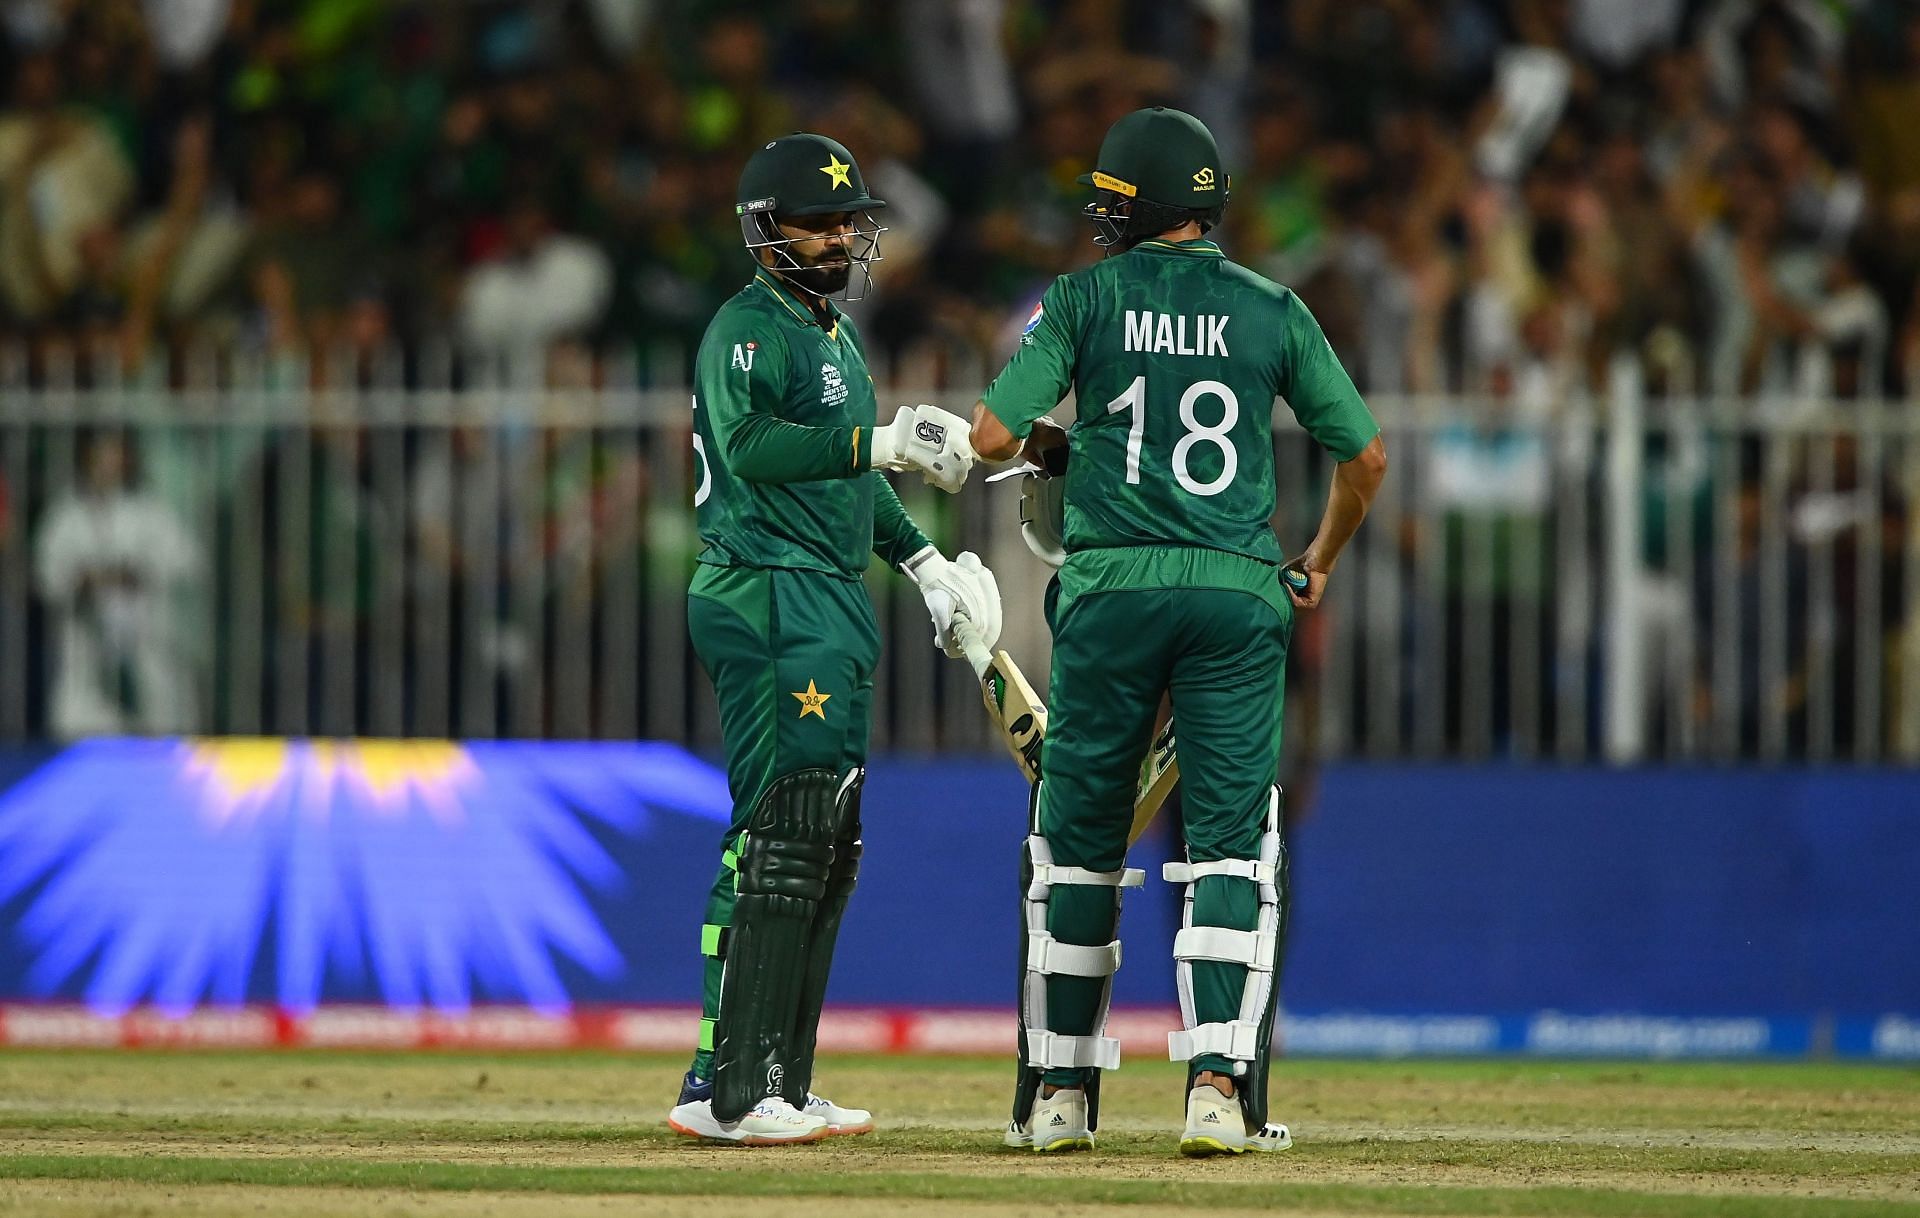 Pakistan have four points from two matches in ICC T20 World Cup 2021